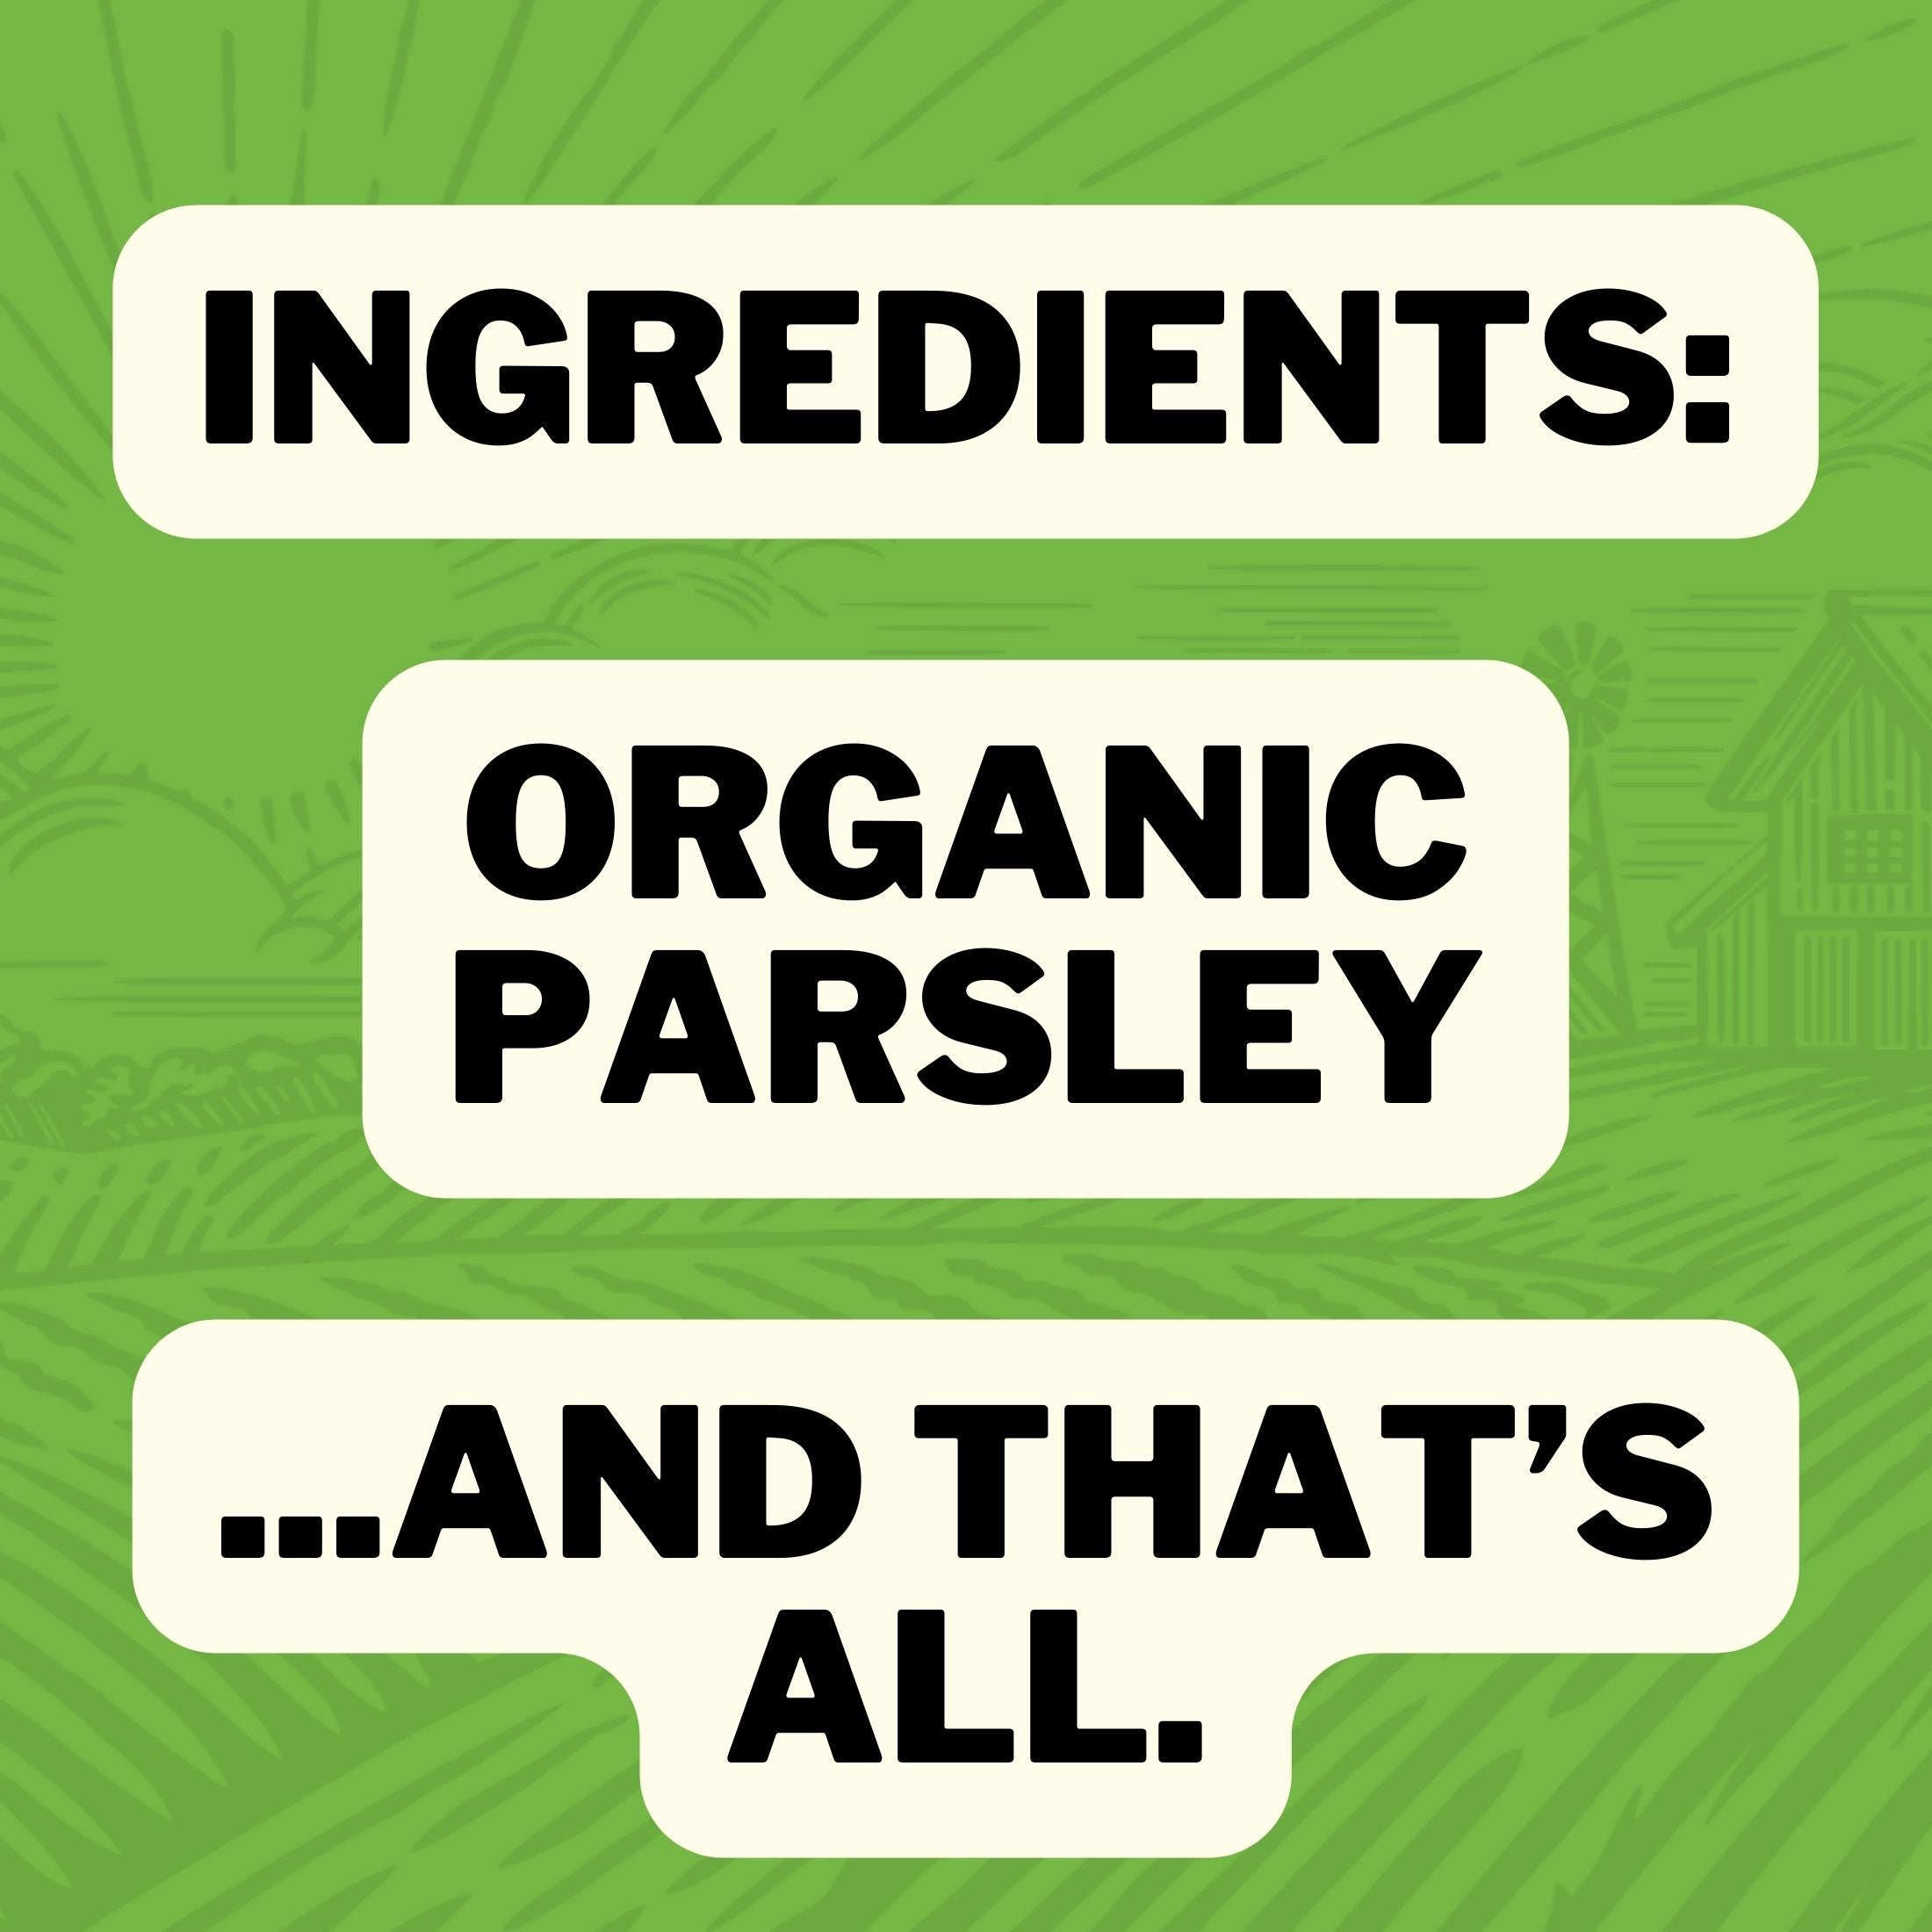 Ingredients : Organic Parsley ... And That's All.